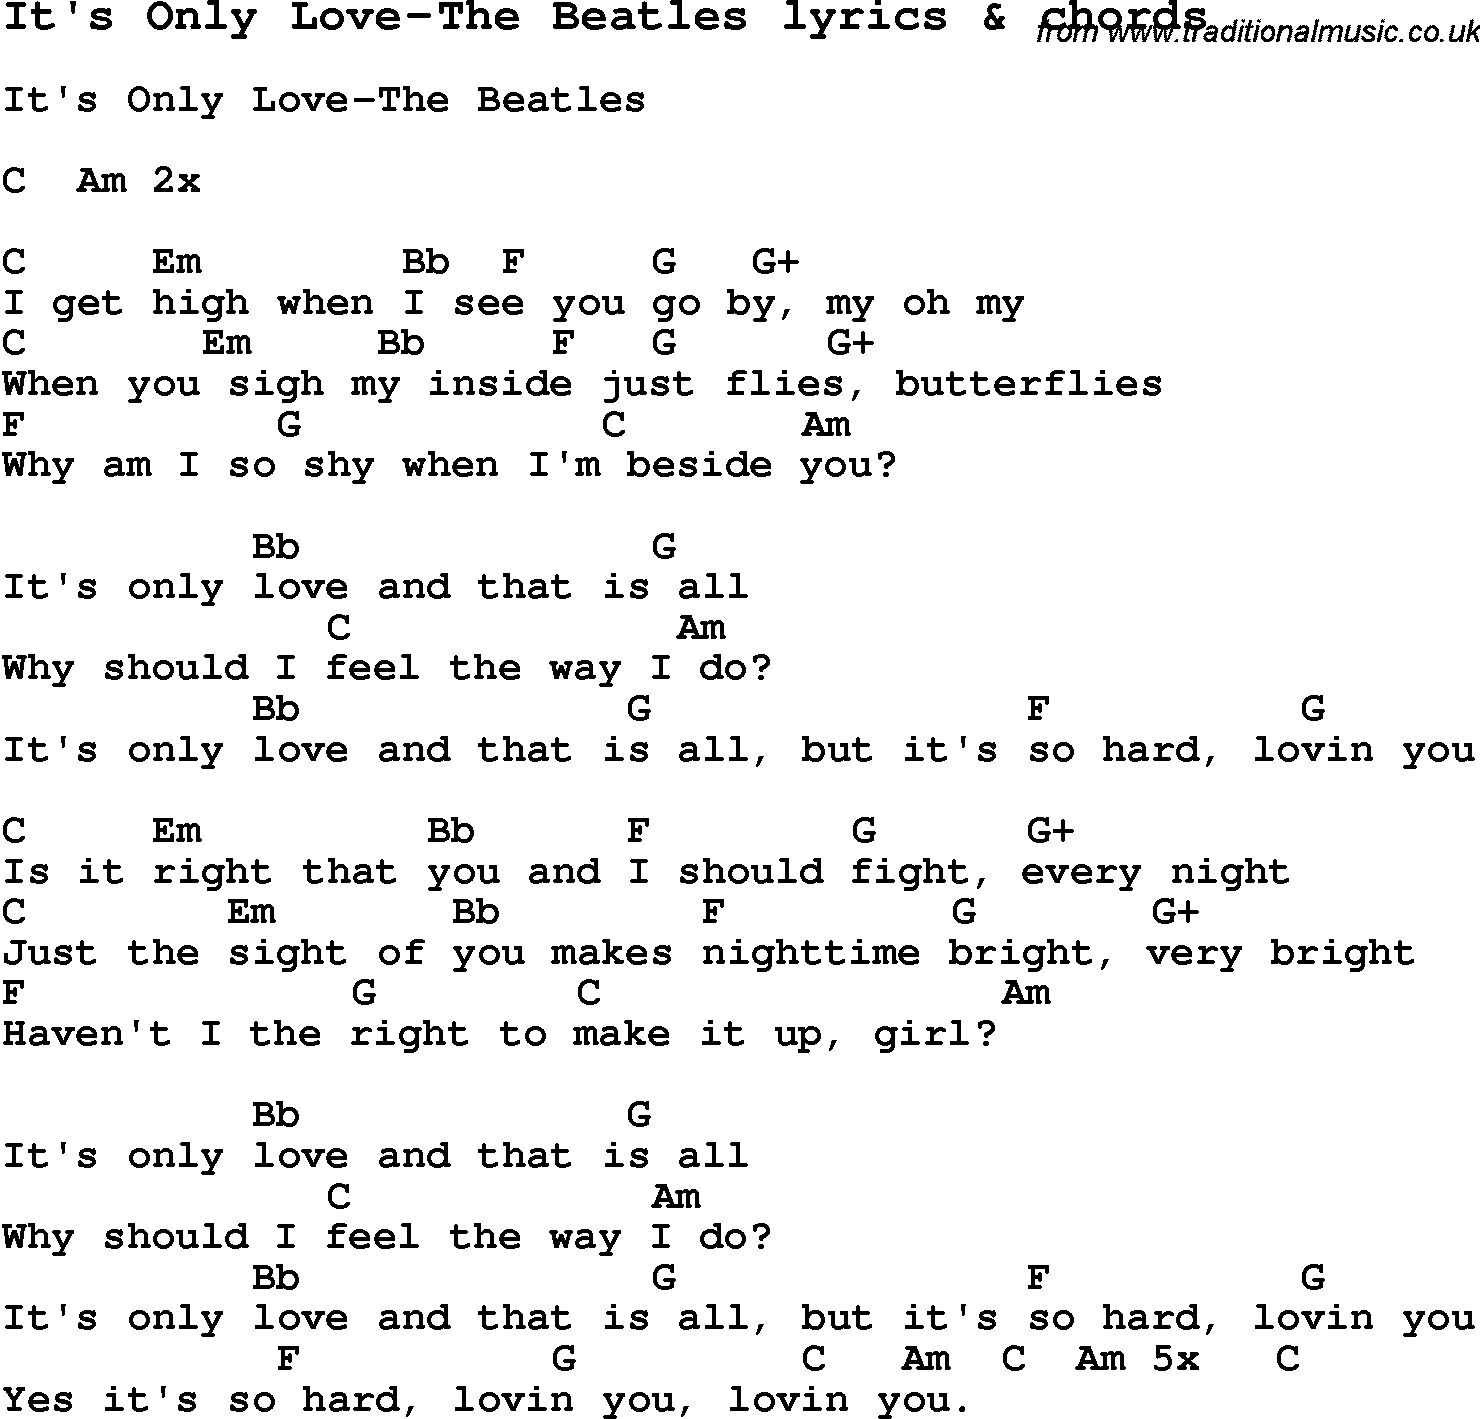 Love Song Lyrics for: It's Only Love-The Beatles with chords for Ukulele, Guitar Banjo etc.